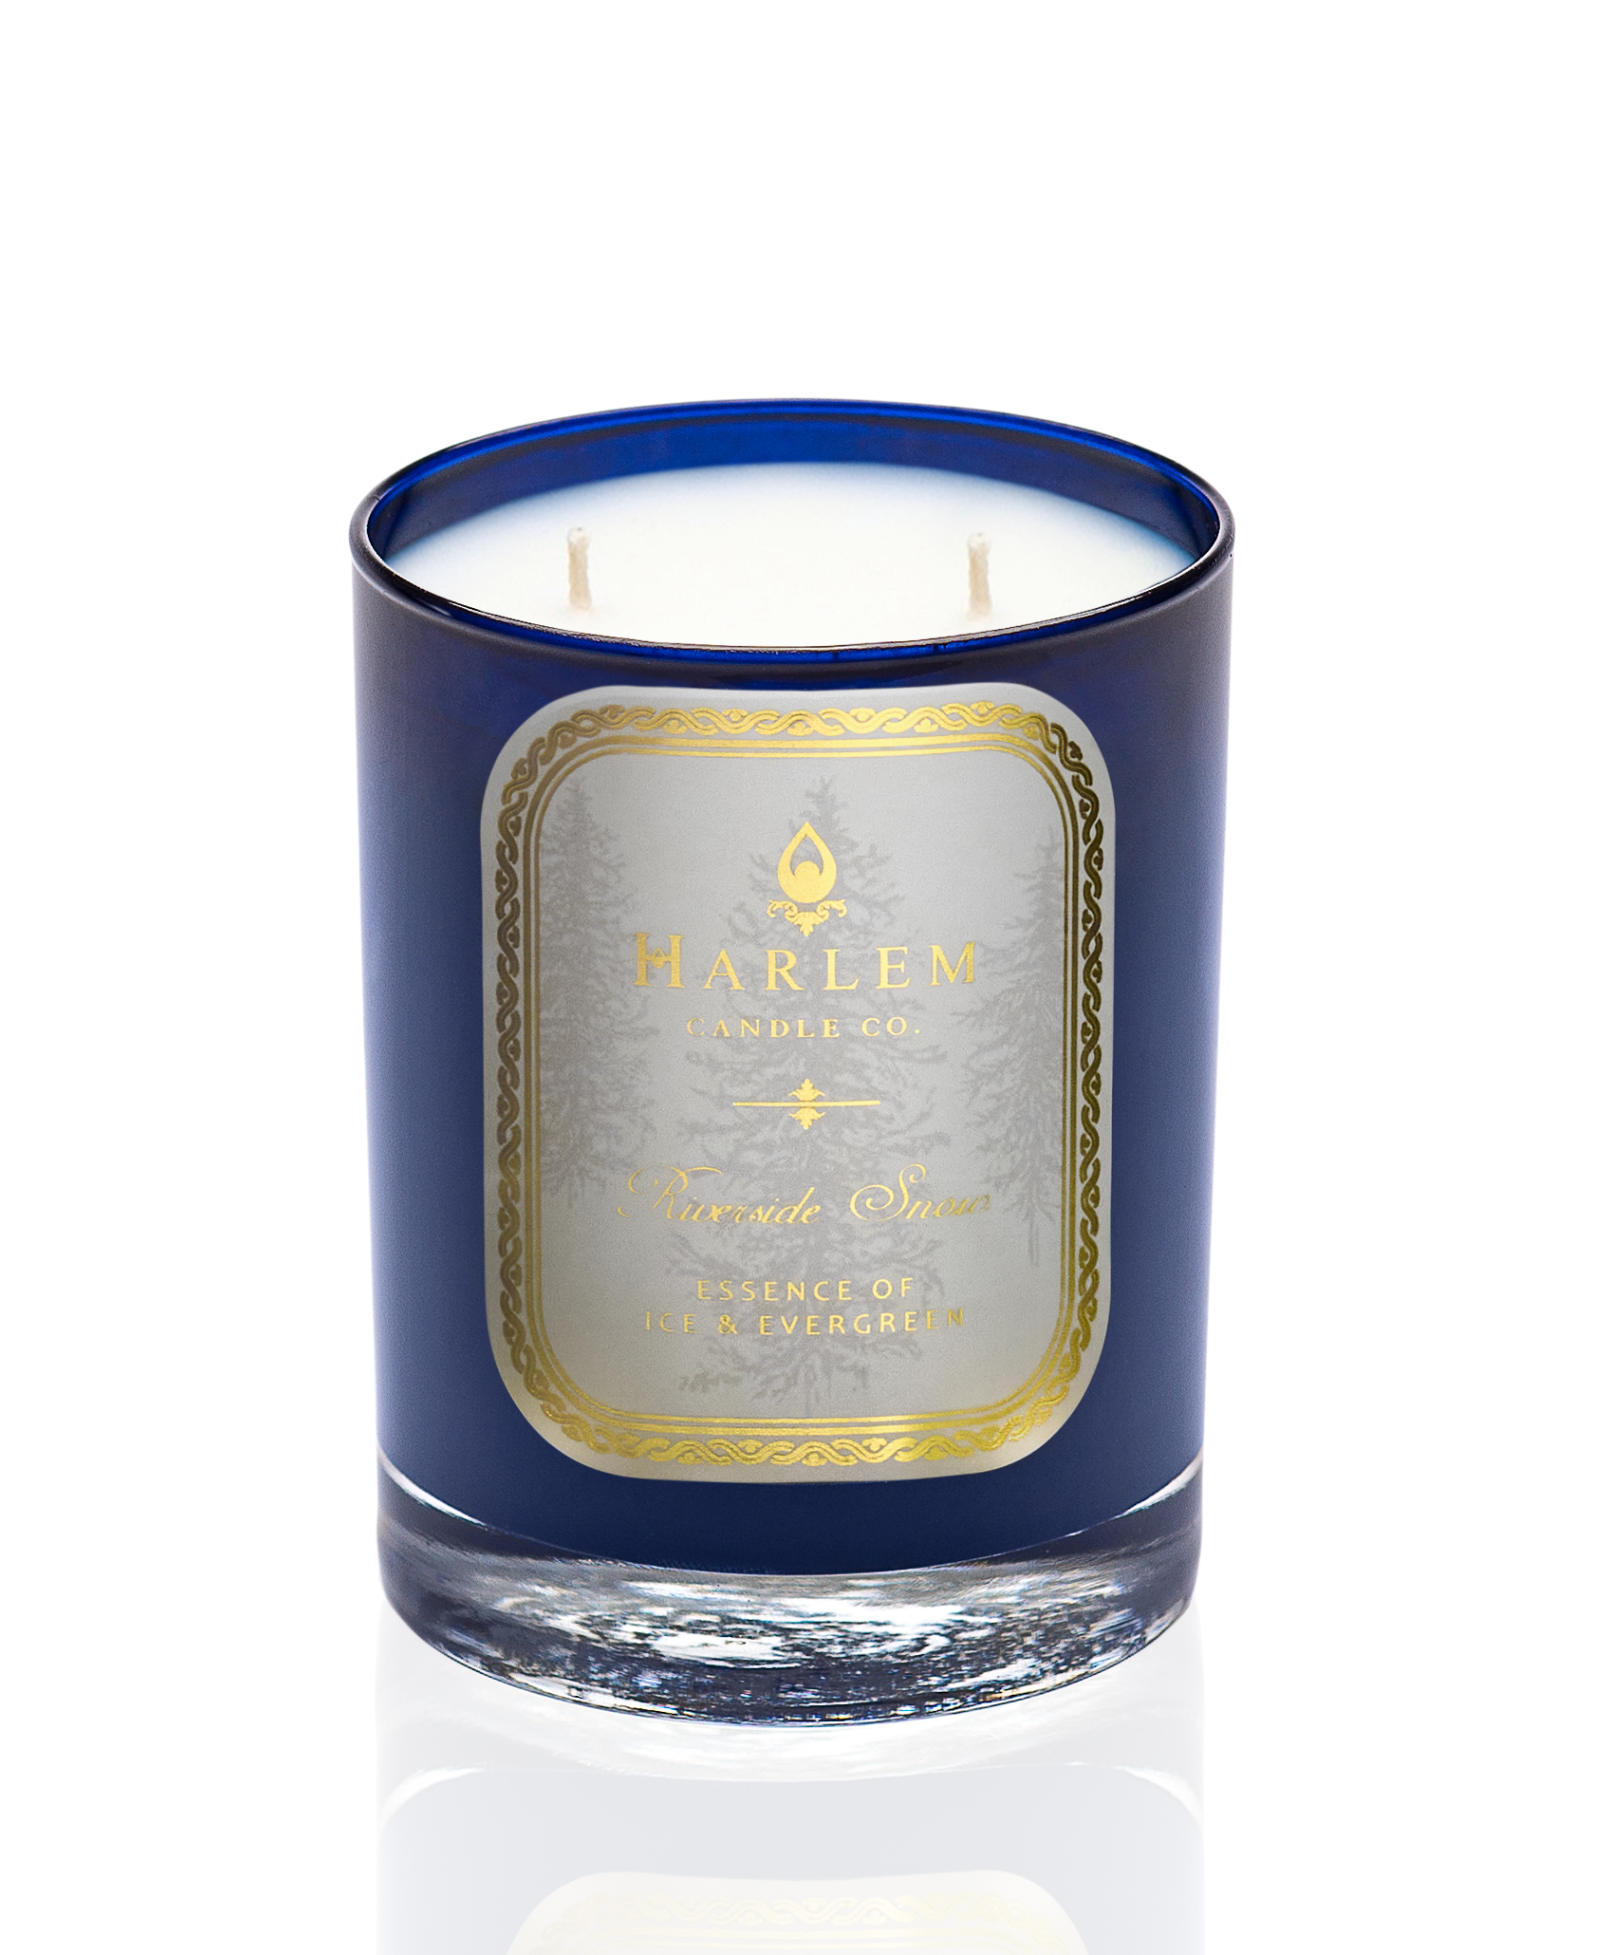 Riverside Snow 2-wick candle in a bright blue glass with a cream and gold label on the front with a white background.